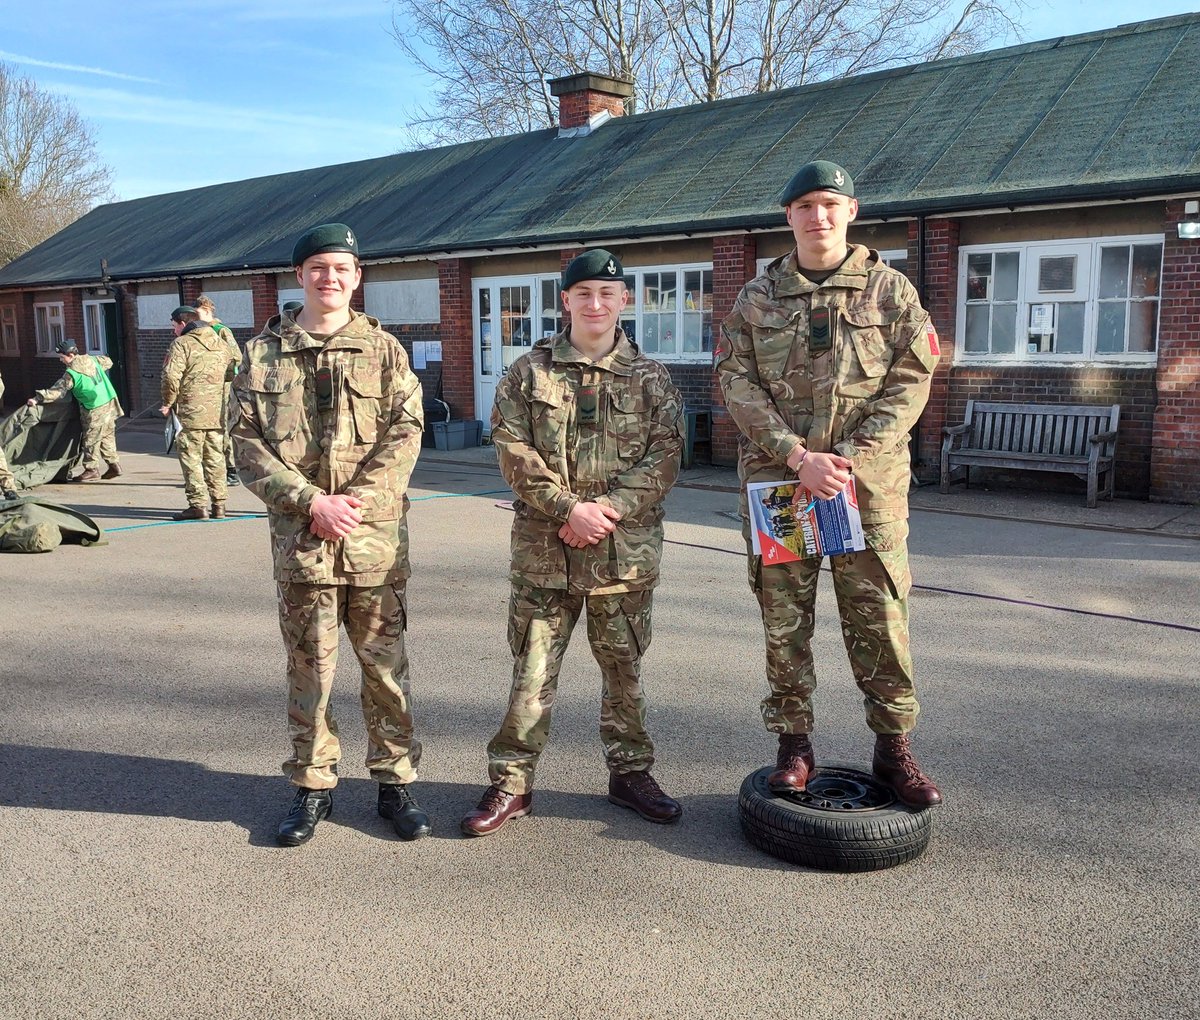 The event would not be possible without the support of our #fantastic Senior #CCF Cadets and CFAVs. Great to see our students developing their peers #personaldevelopment Thanks for the help all! @CCFcadets @aircadets @ArmyCadetsUK